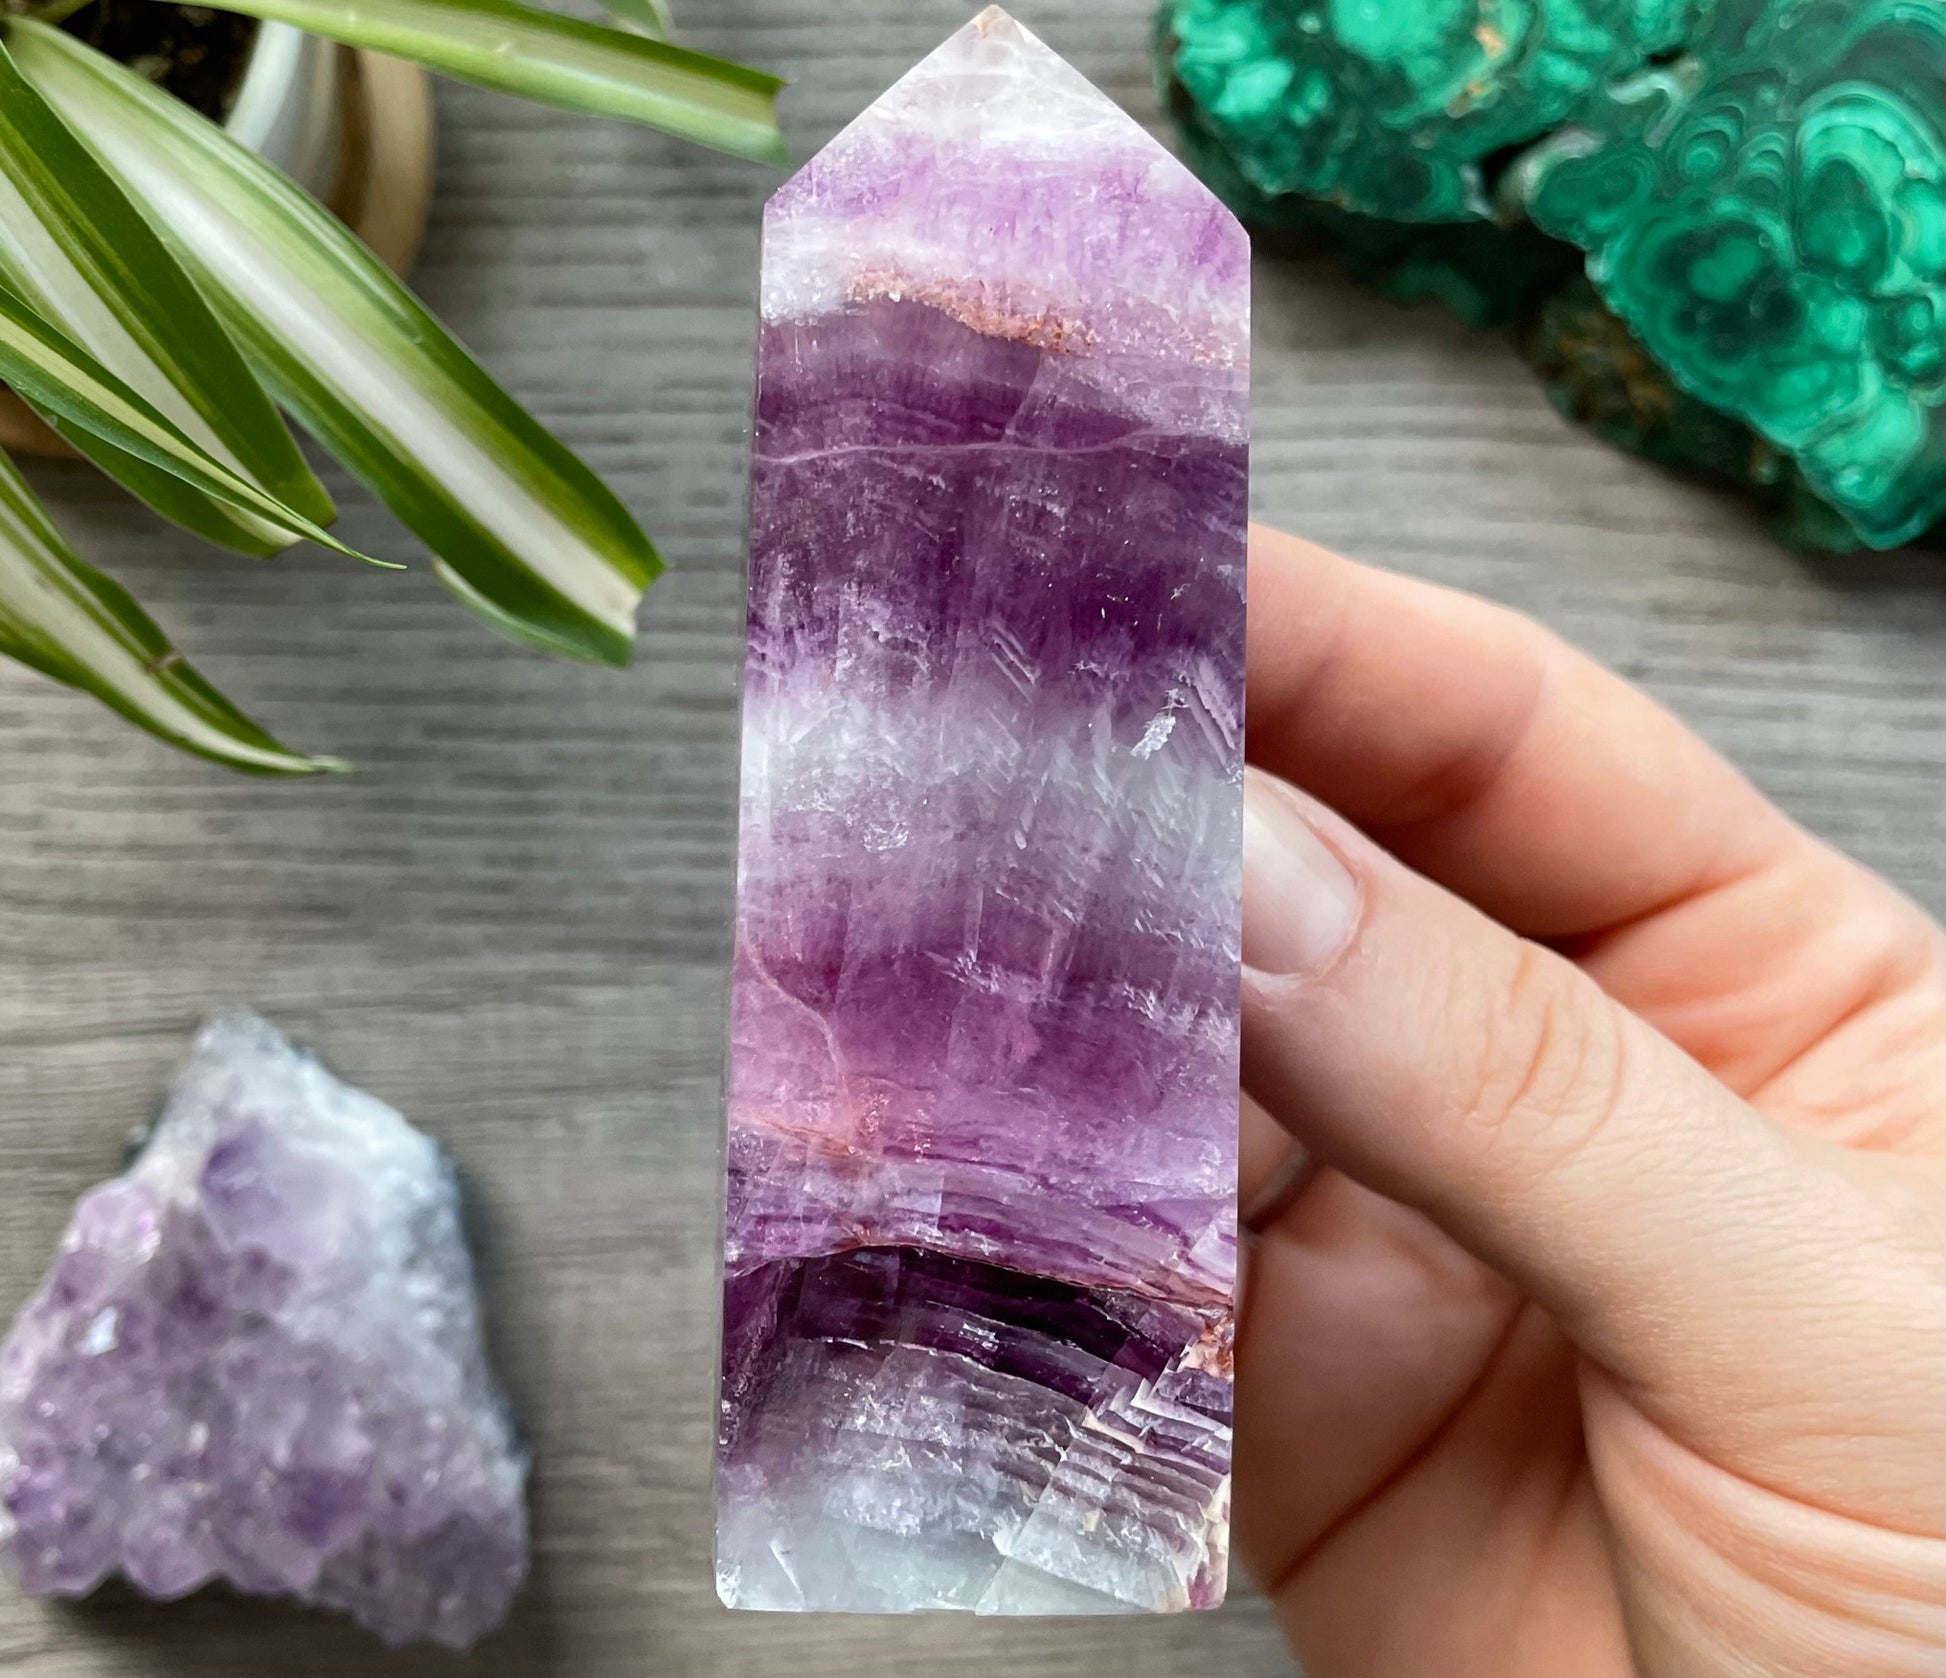 Pictured is a pink and purple fluorite obelisk. 